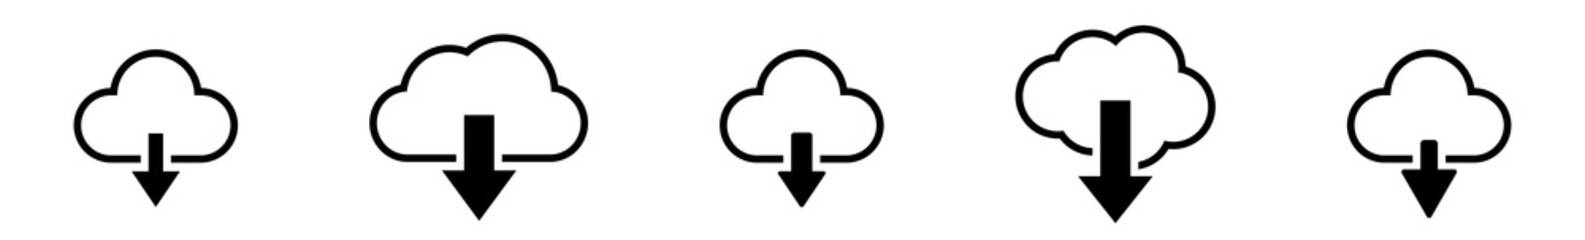 Cloud Download Icon Black | Clouds Arrow Down Illustration | Computing Storage Symbol |  Server Data Internet Logo | IT Service Sign | Isolated | Variations